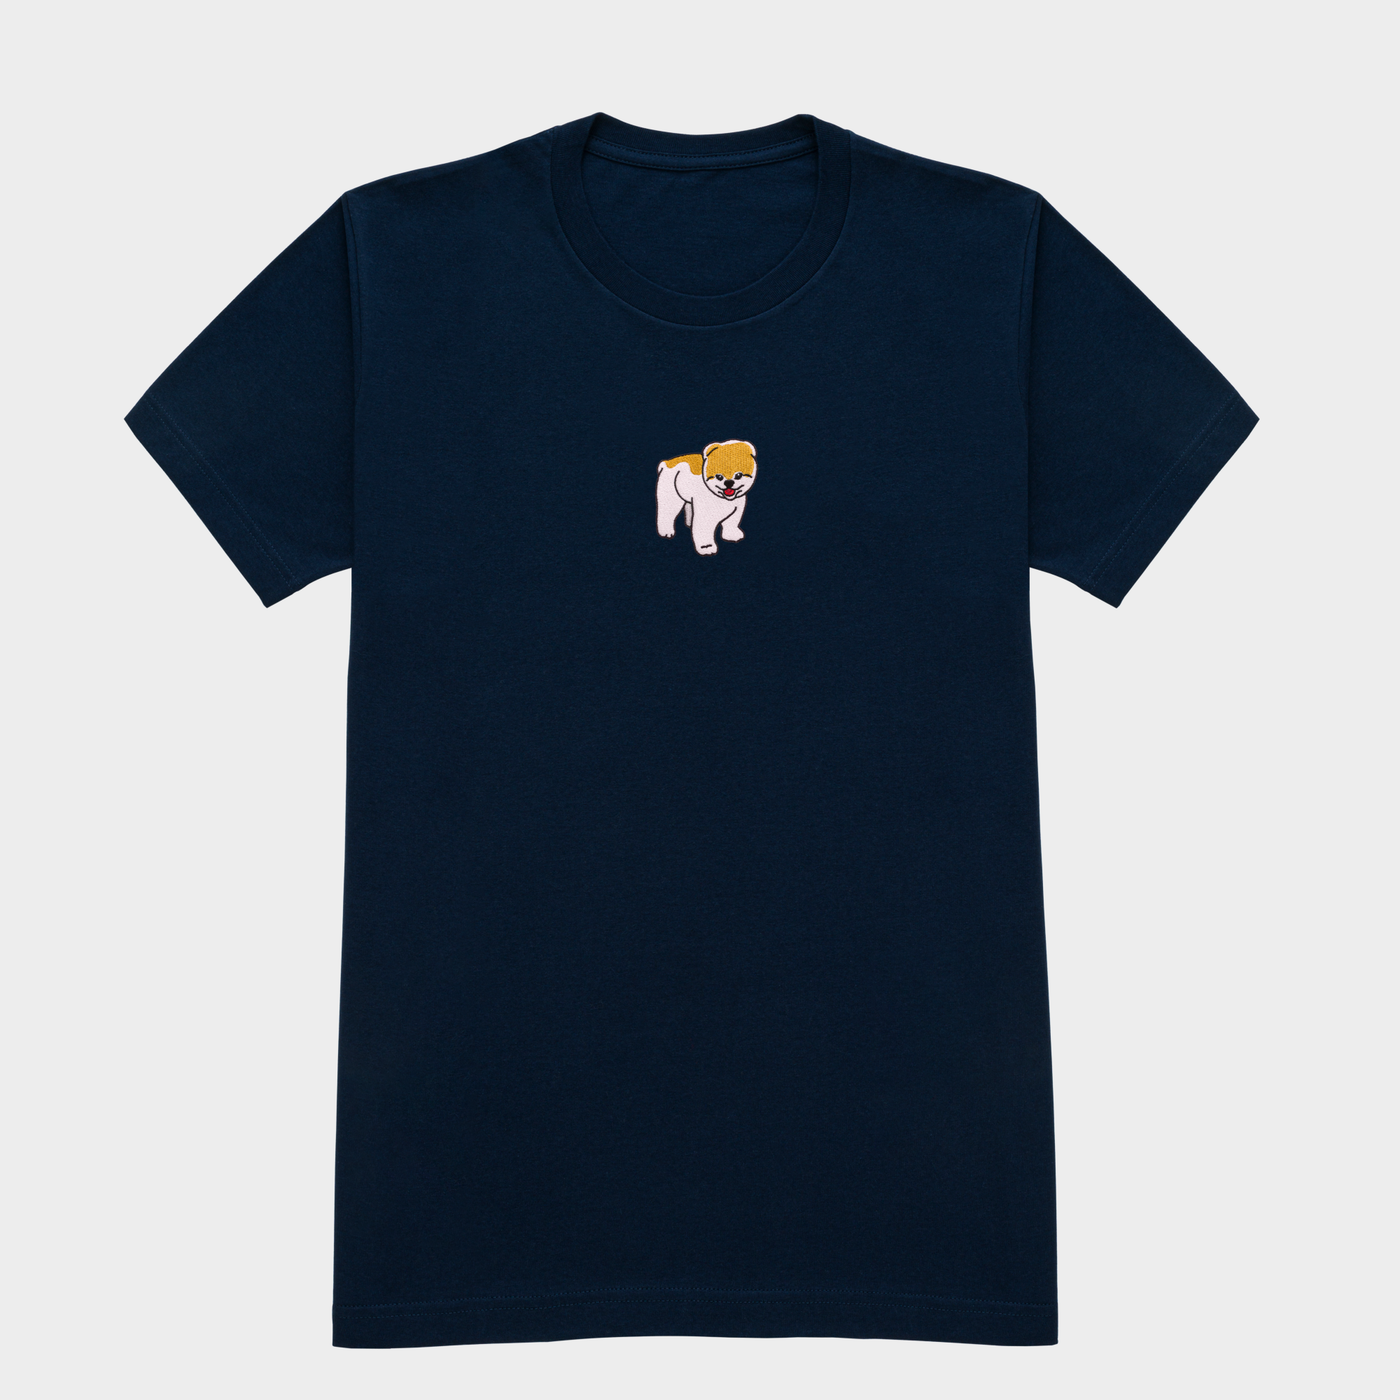 Bobby's Planet Women's Embroidered Pomeranian T-Shirt from Paws Dog Cat Animals Collection in Navy Color#color_navy